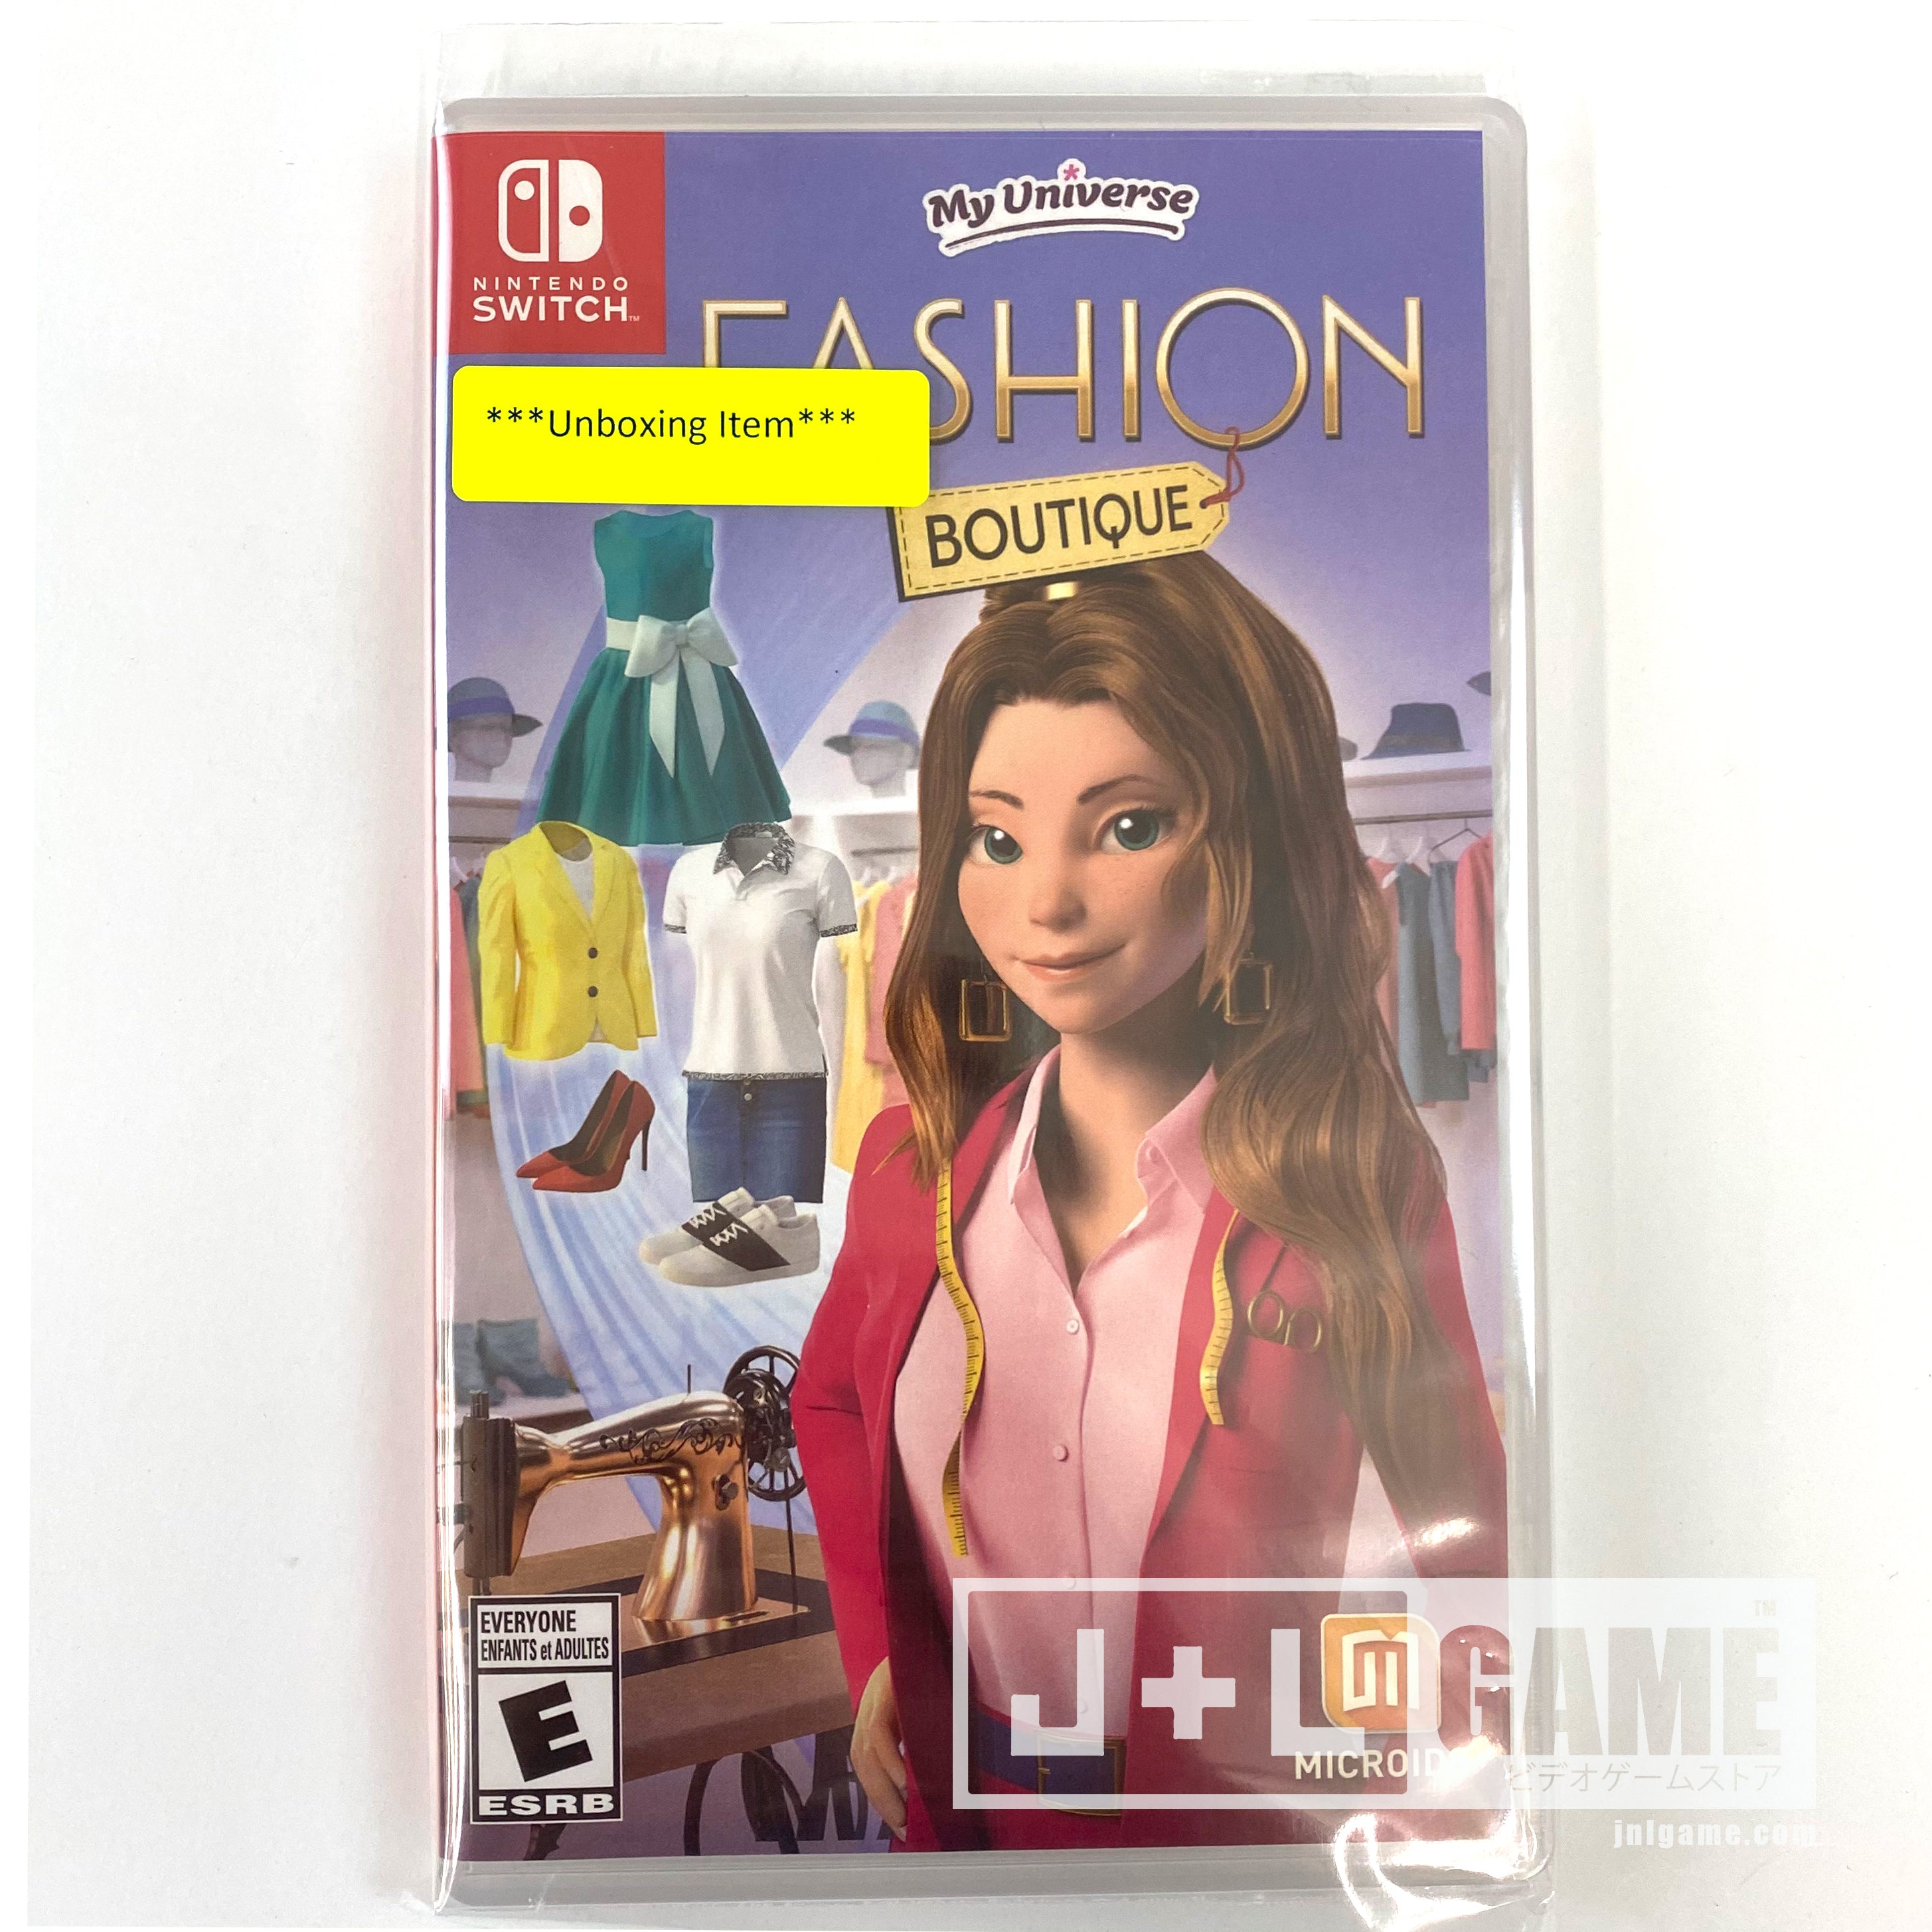 My Universe - Fashion Boutique - (NSW) Nintendo Switch [UNBOXING] Video Games Maximum Games   